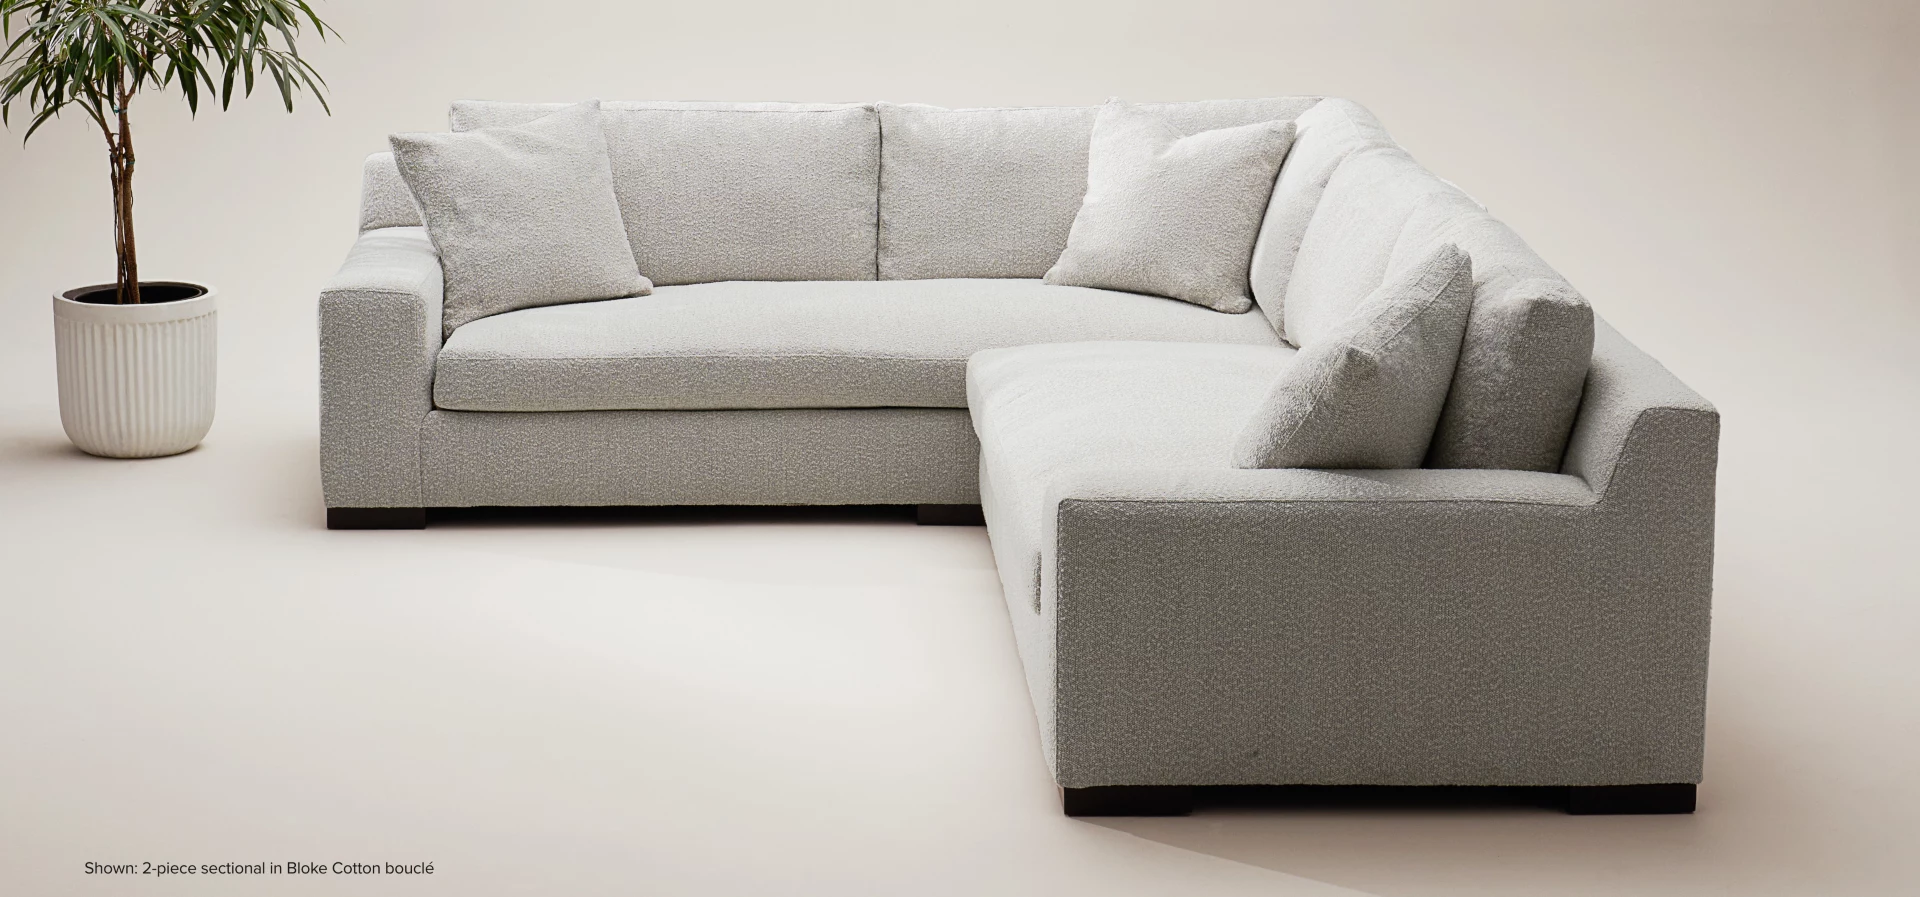 Ethan 2-piece sectional in bloke cotton boucle